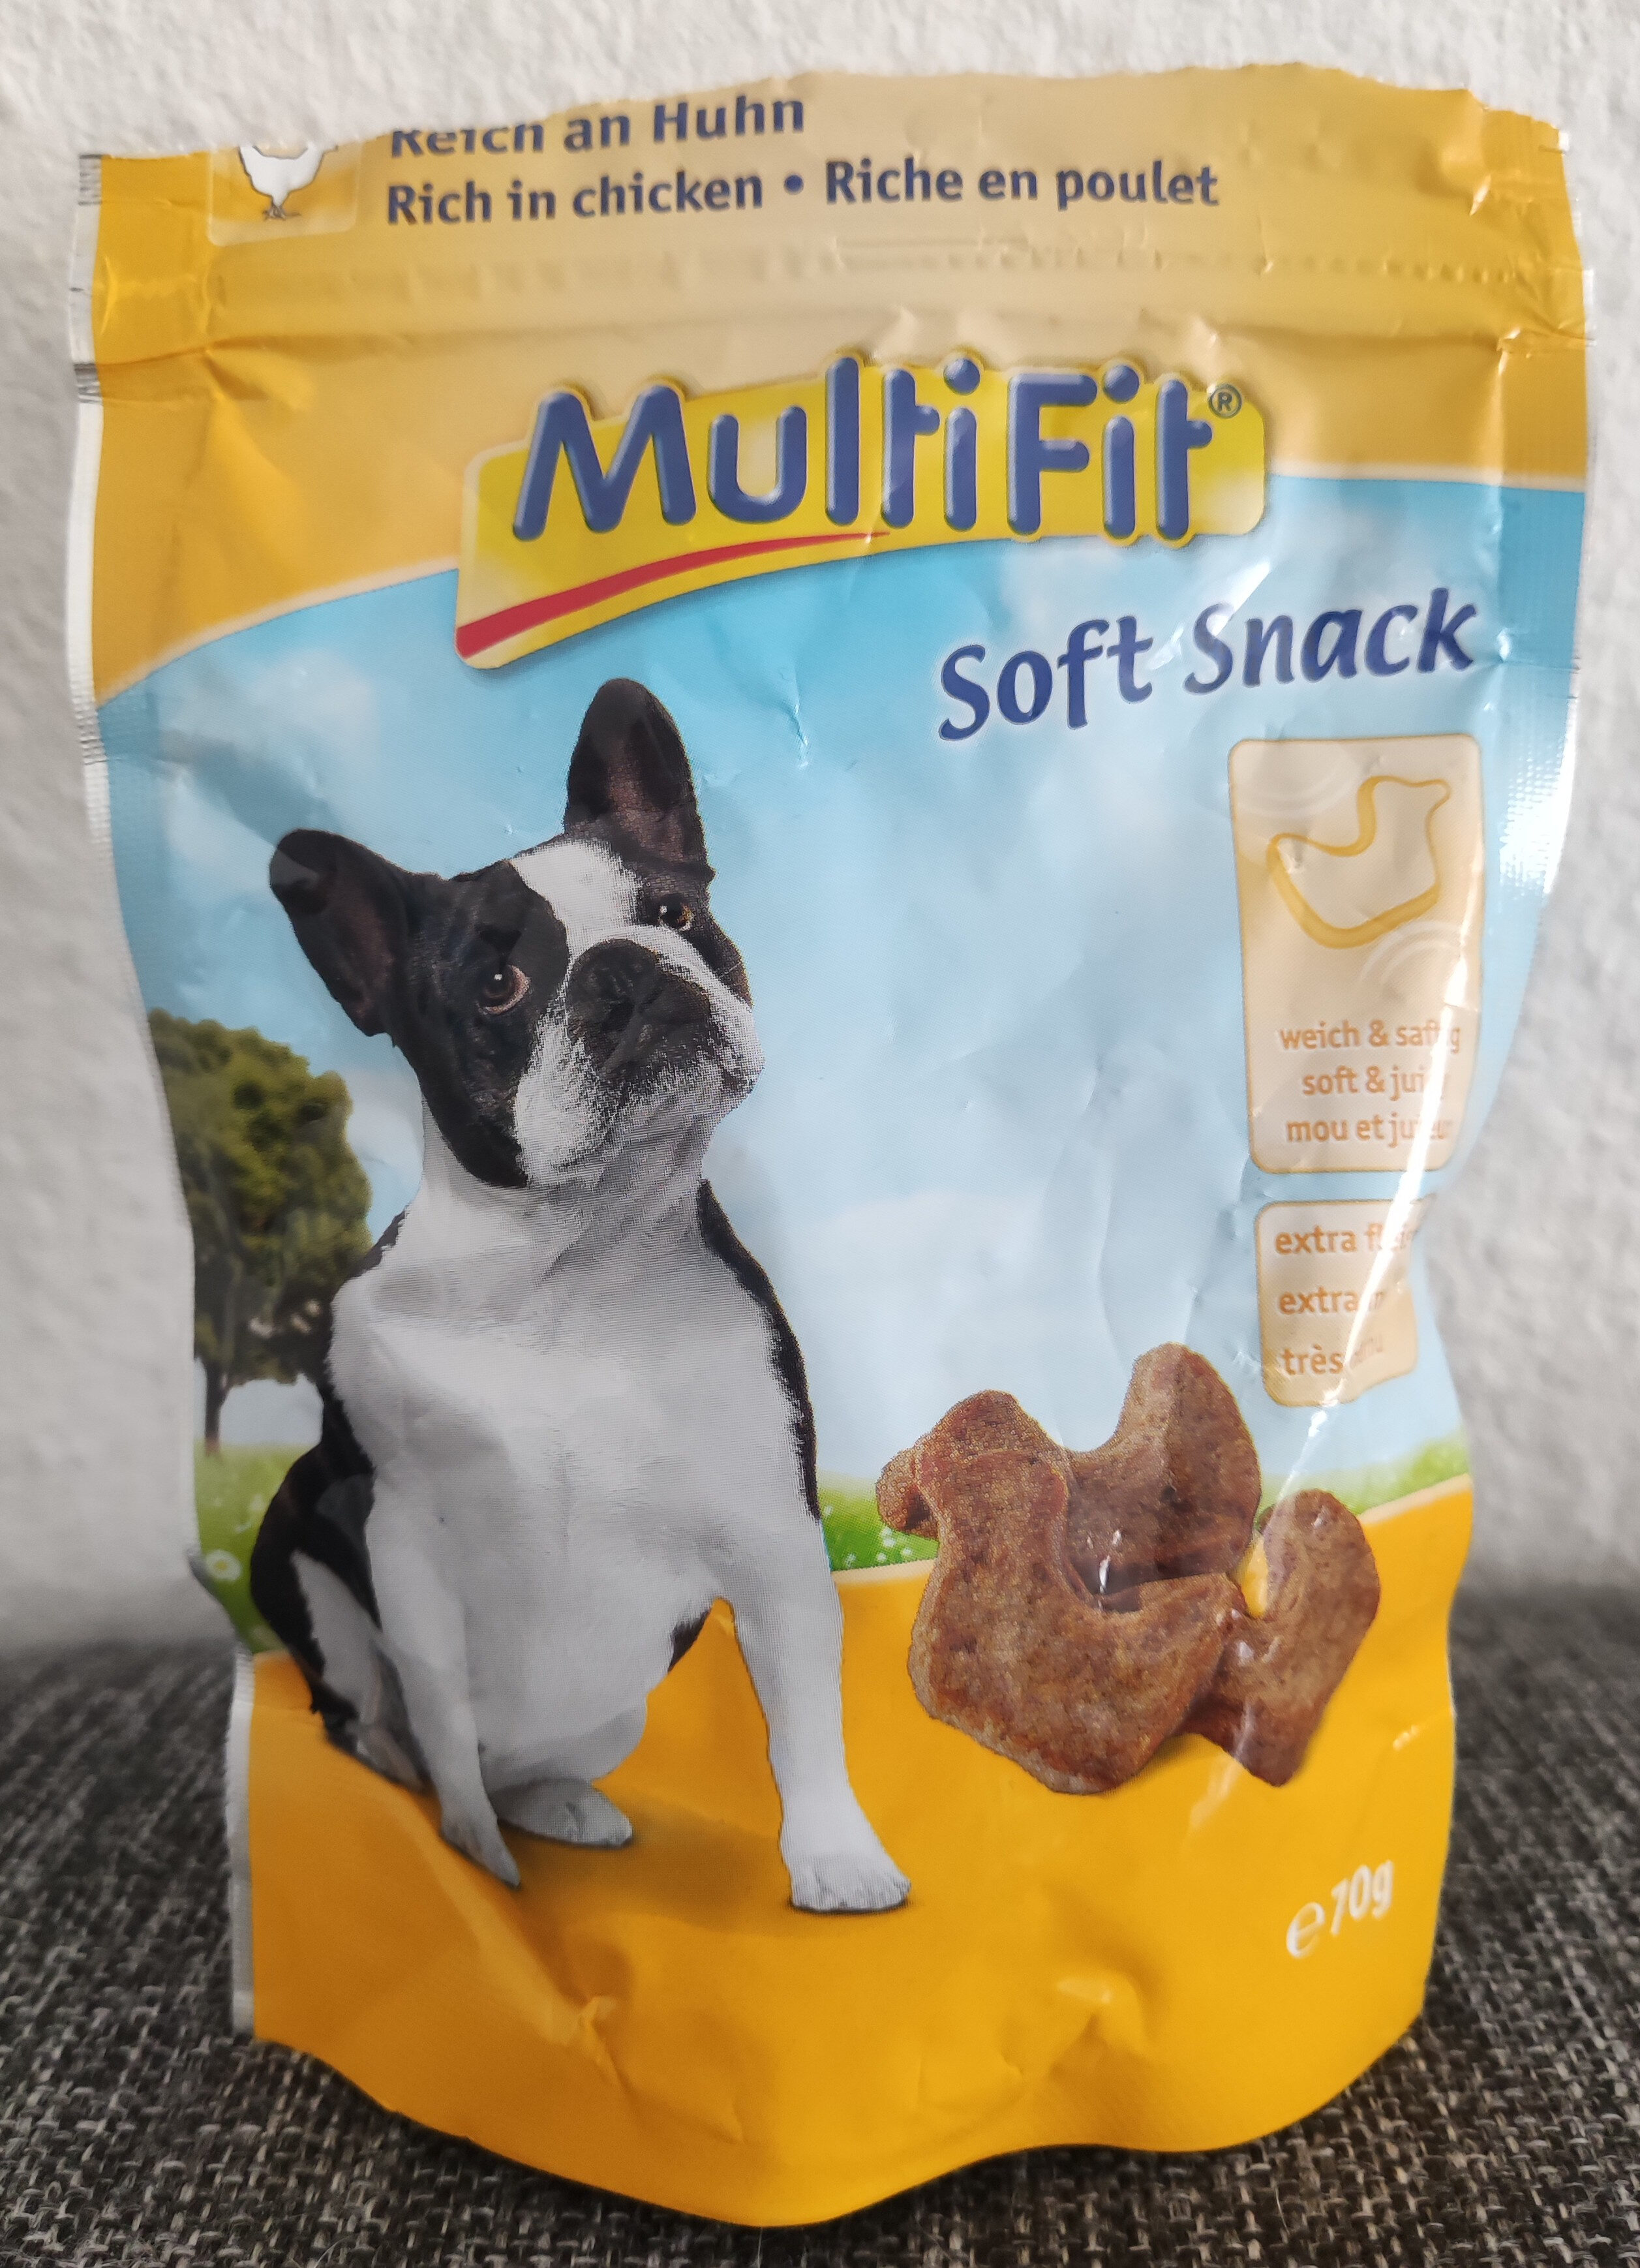 Soft Snack reich an Huhn - Product - de